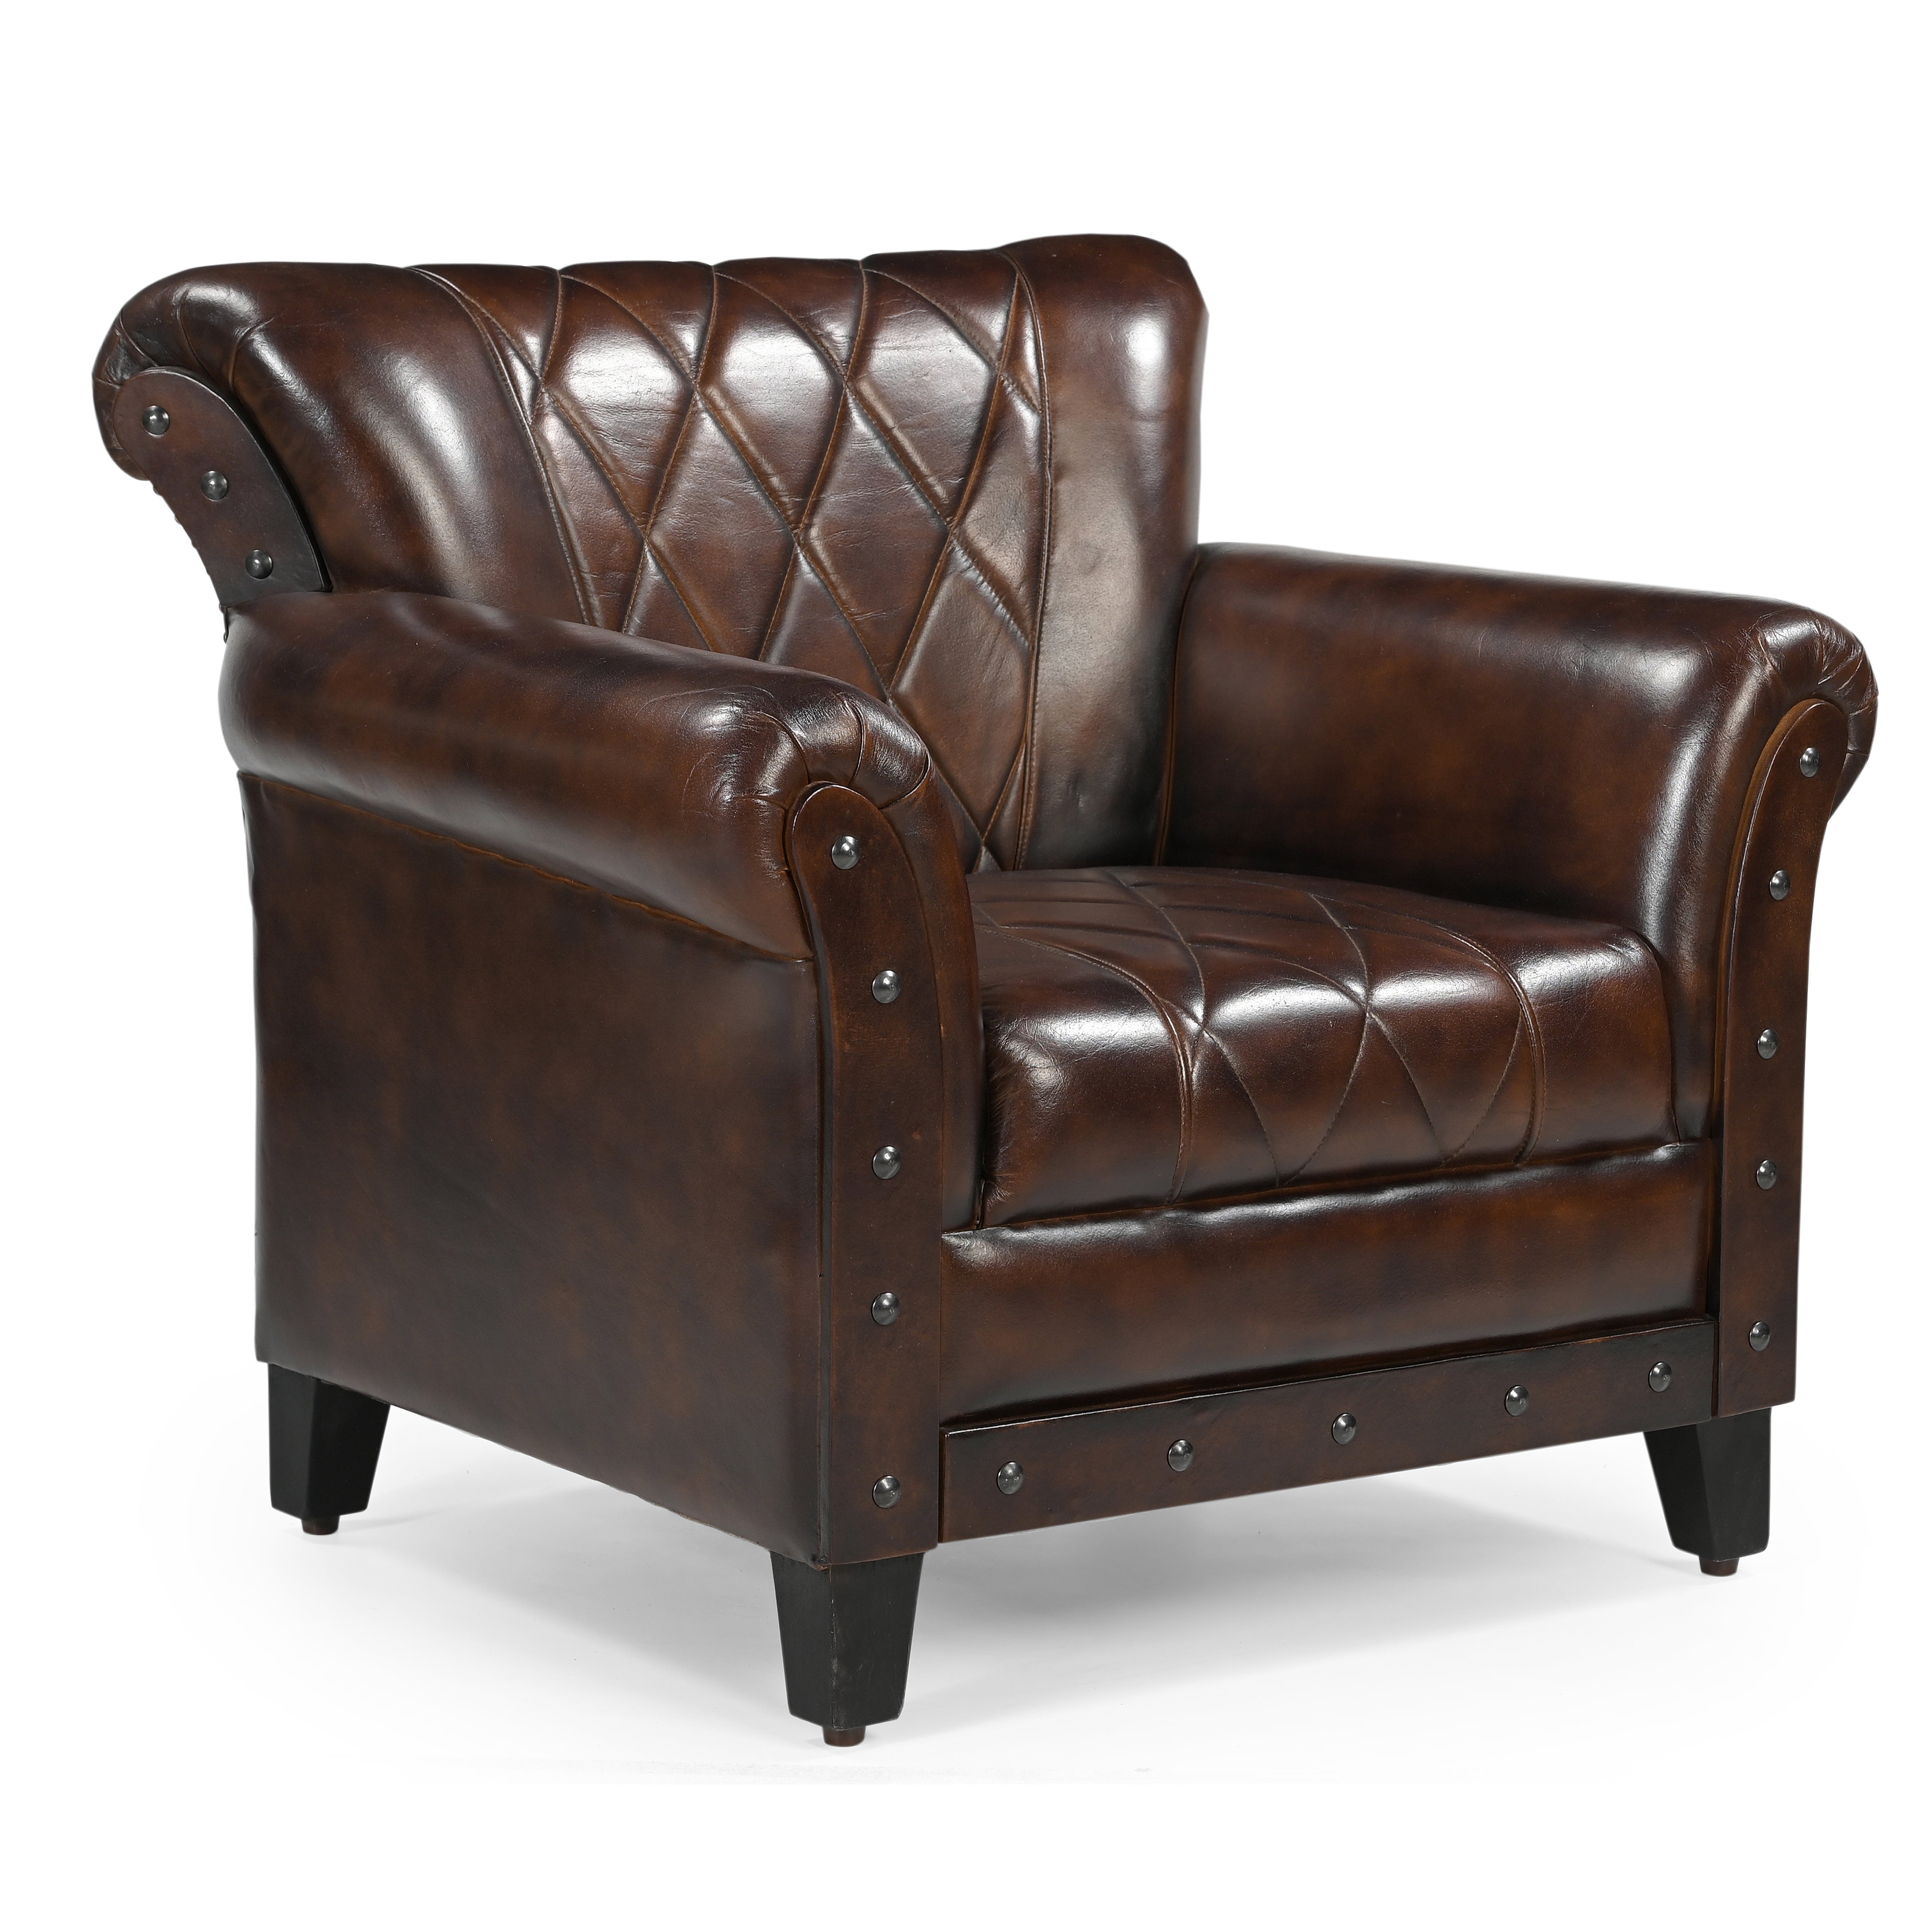 Criss Cross Chocolate Leather Arm Chair Buy Armchairs Accent